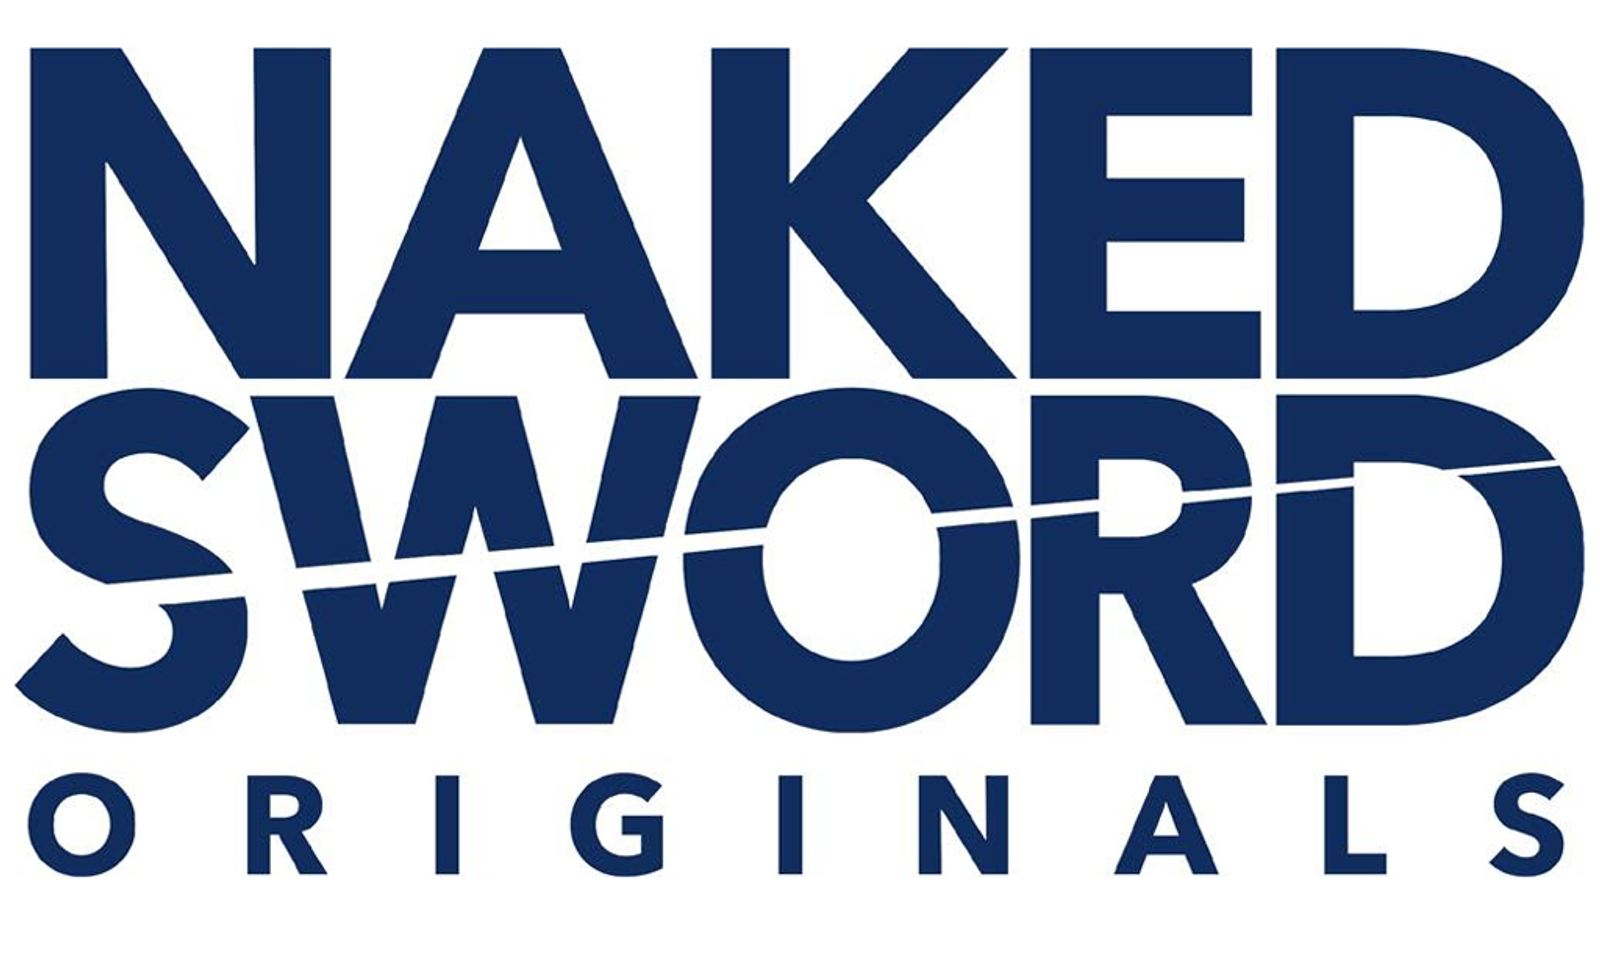 NakedSword Spotlights 'New Arrivals' With New Series